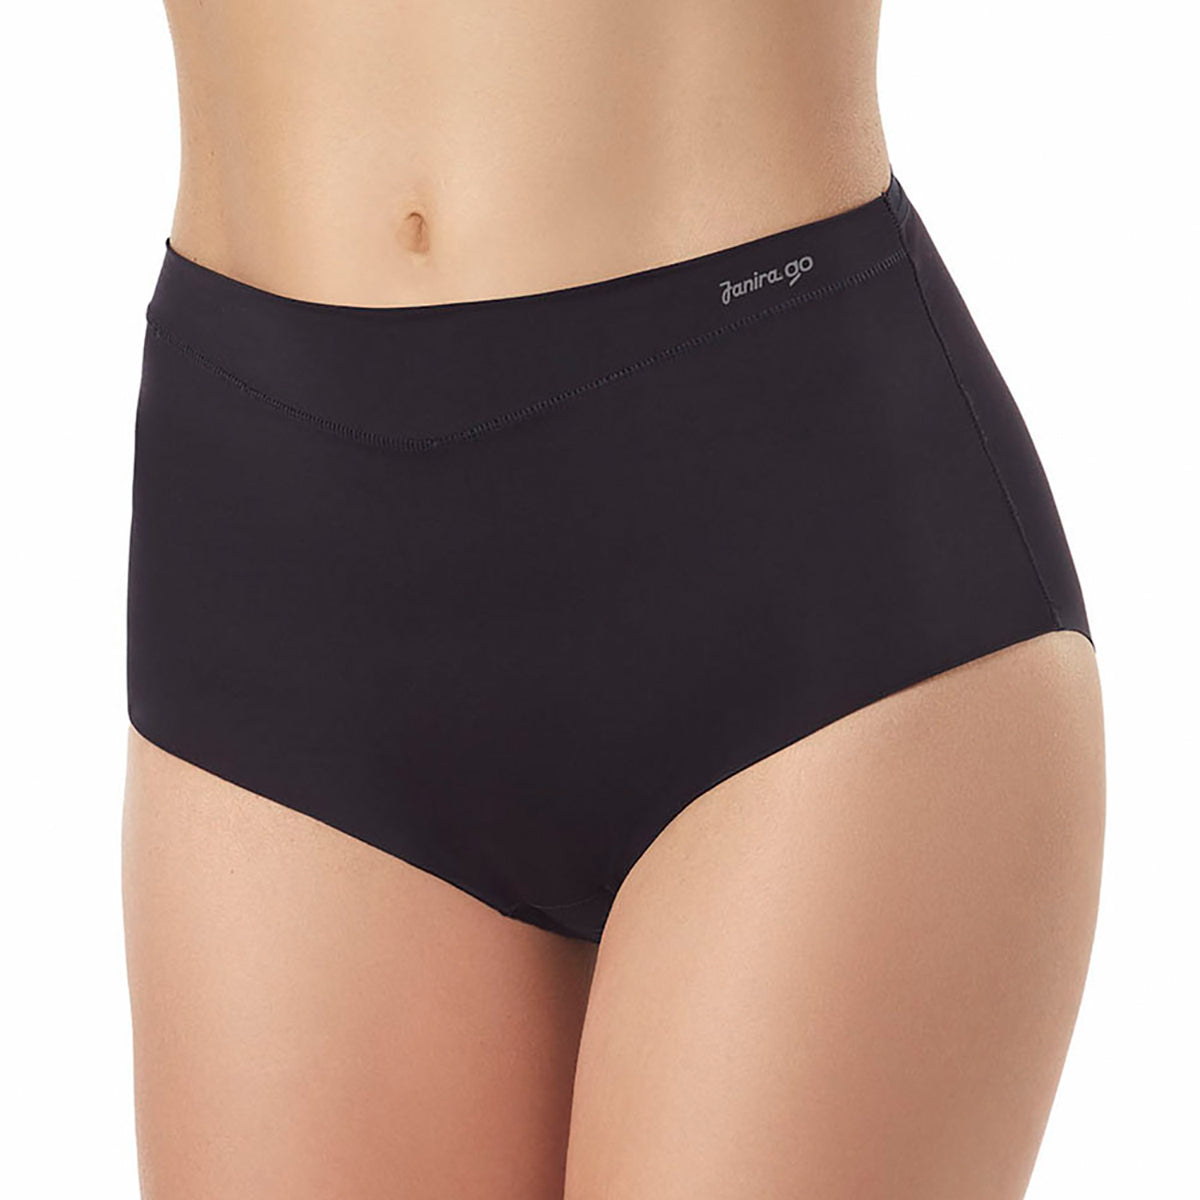 Shop Carole Hochman Seamless Brief with great discounts and prices